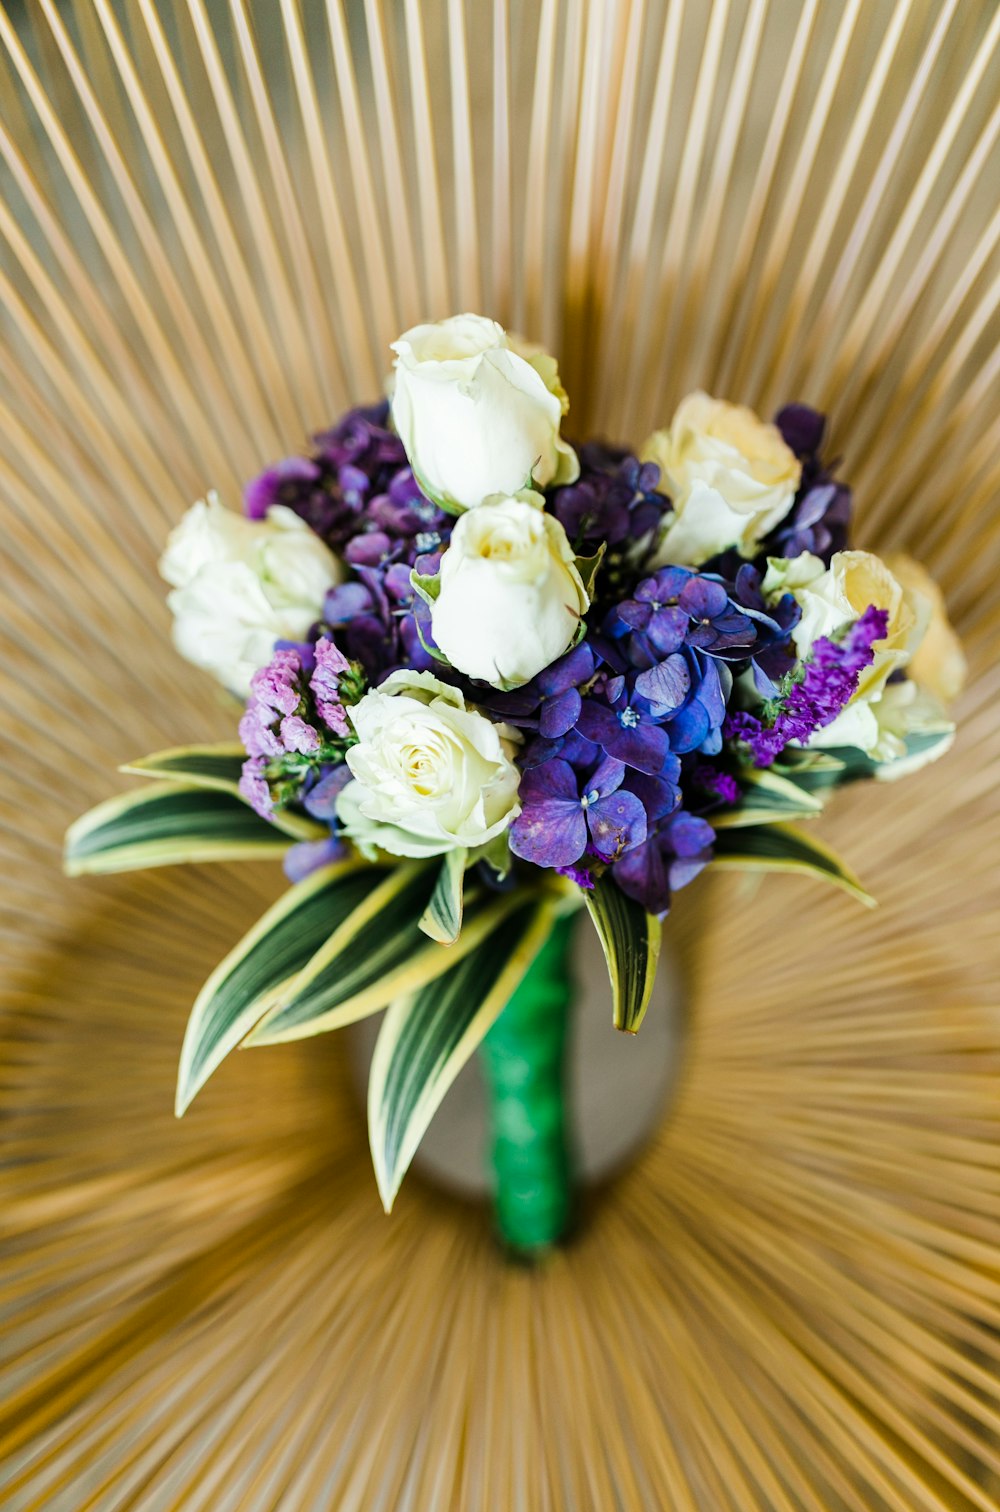 bouquet of white and purple-petaled flowers